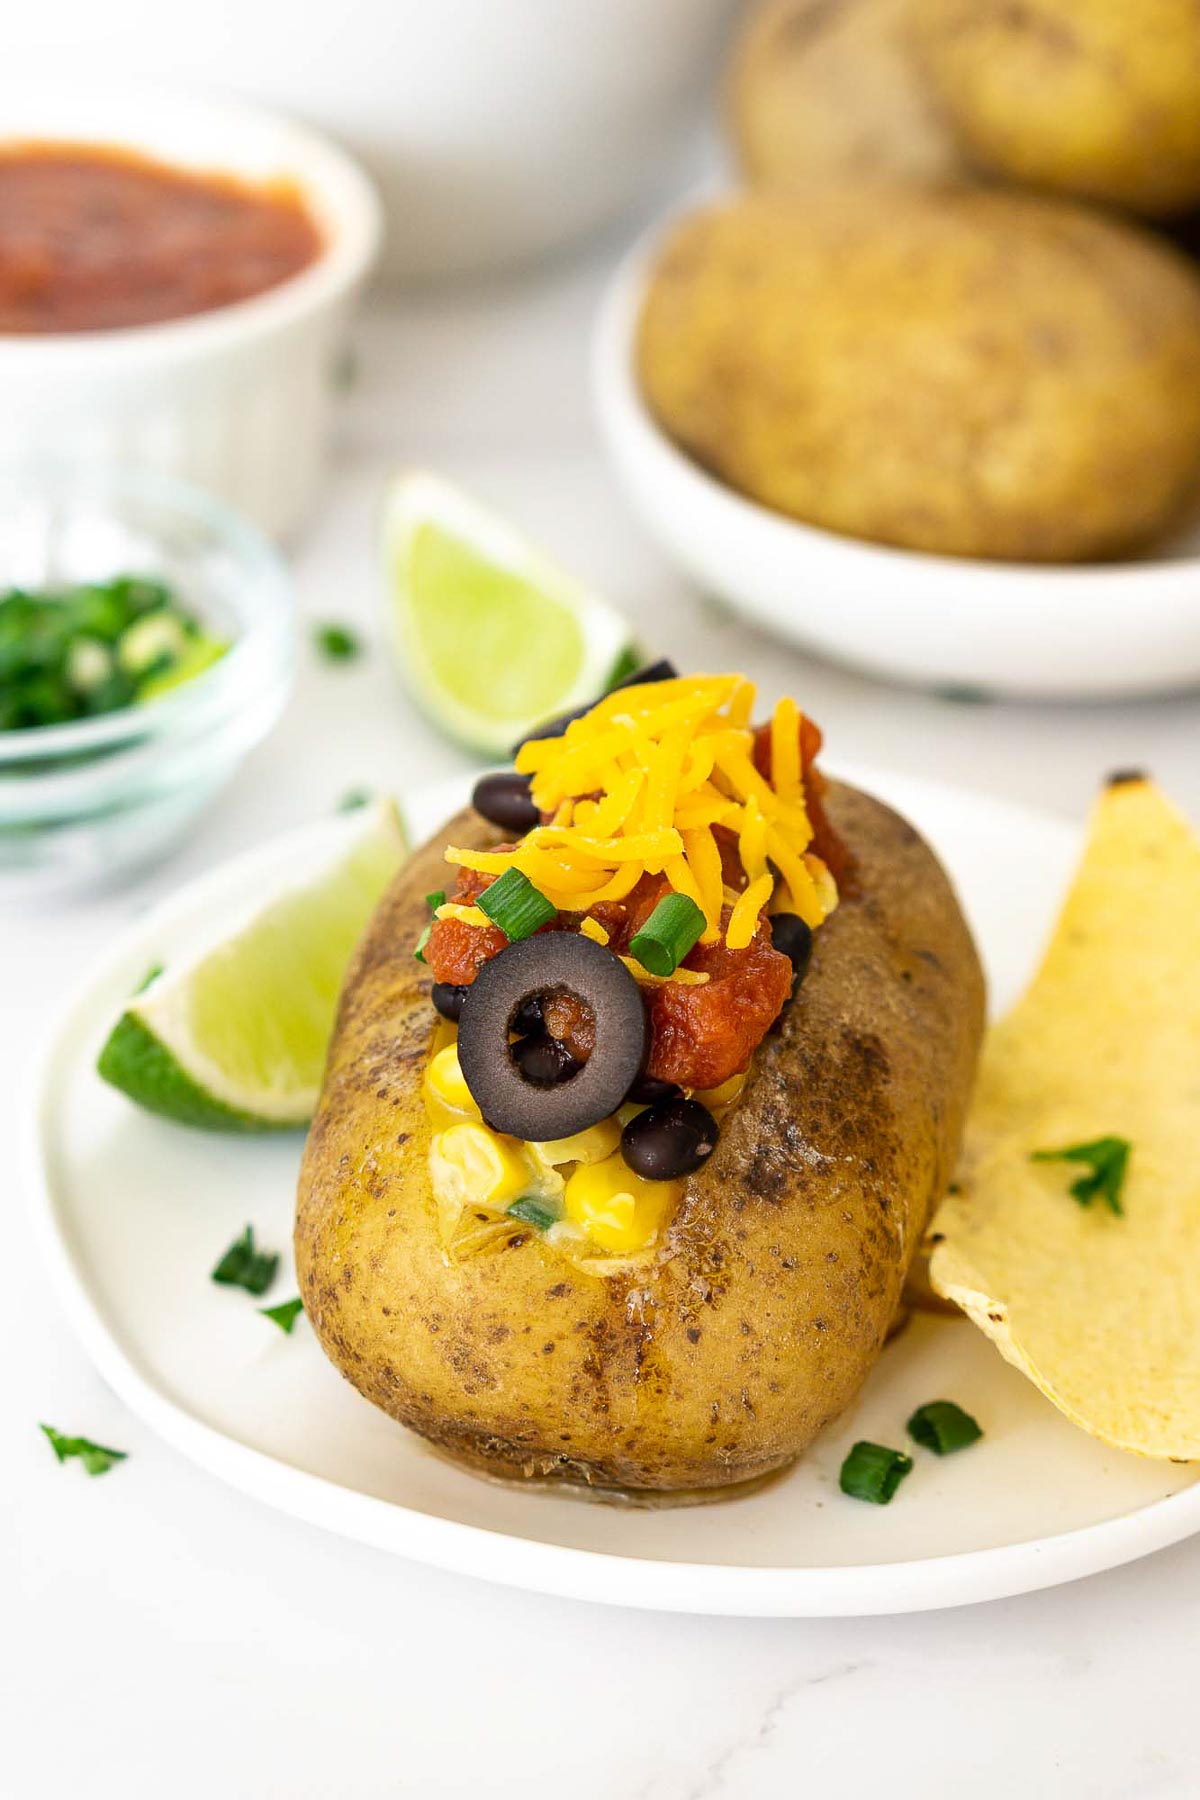 Baked potato loaded with salsa, black beans, olives, and cheese